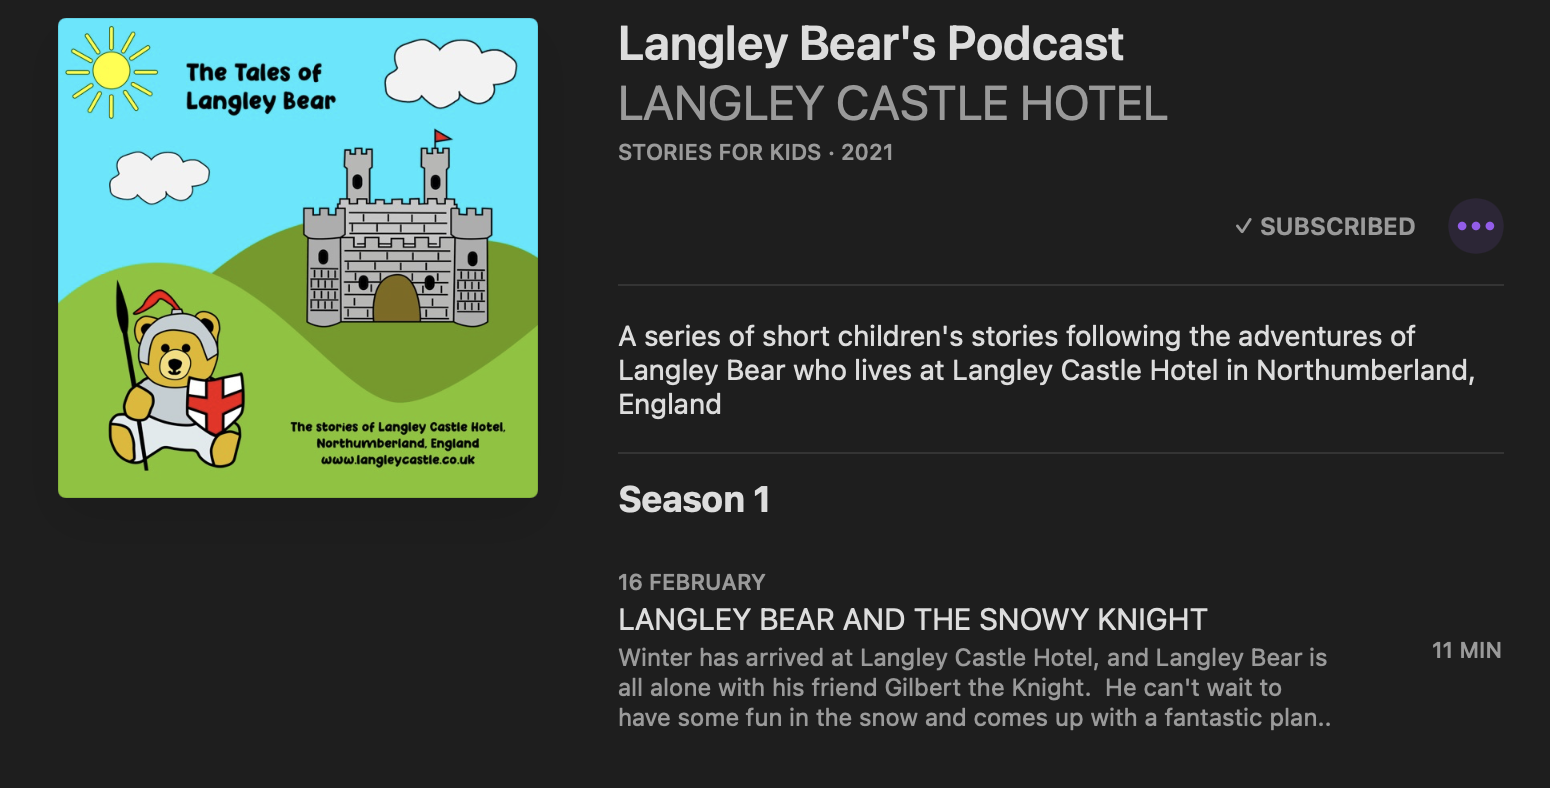 Details of Langley Bear's podcast, produced by Langley Castle Hotel